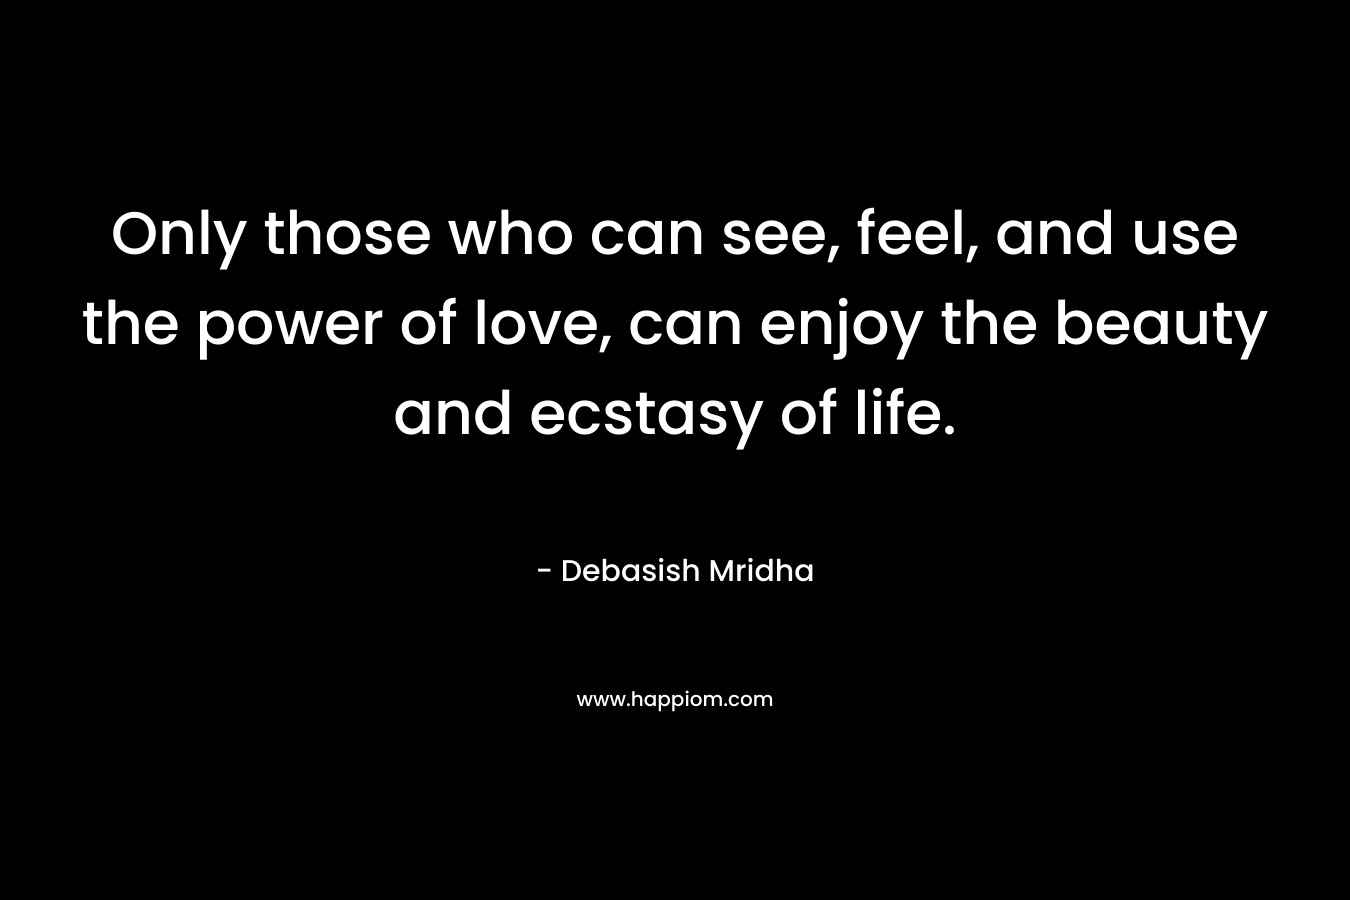 Only those who can see, feel, and use the power of love, can enjoy the beauty and ecstasy of life.